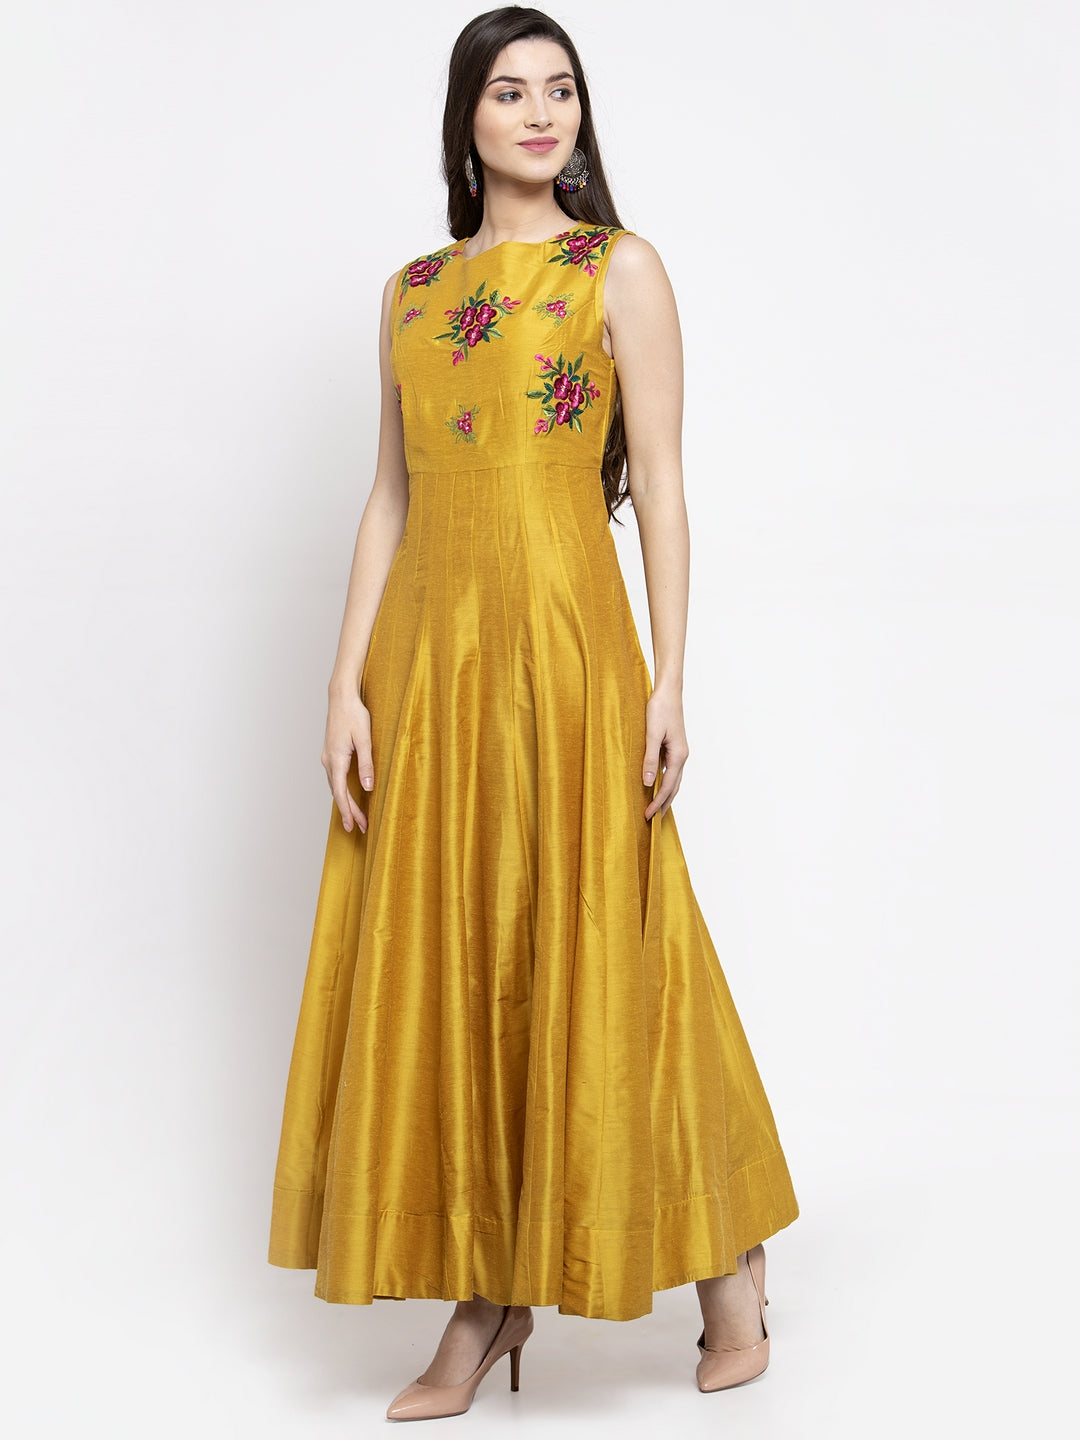 Women's Mustrad Yellow Foral Ethnic Maxi Dress - Bhama Couture